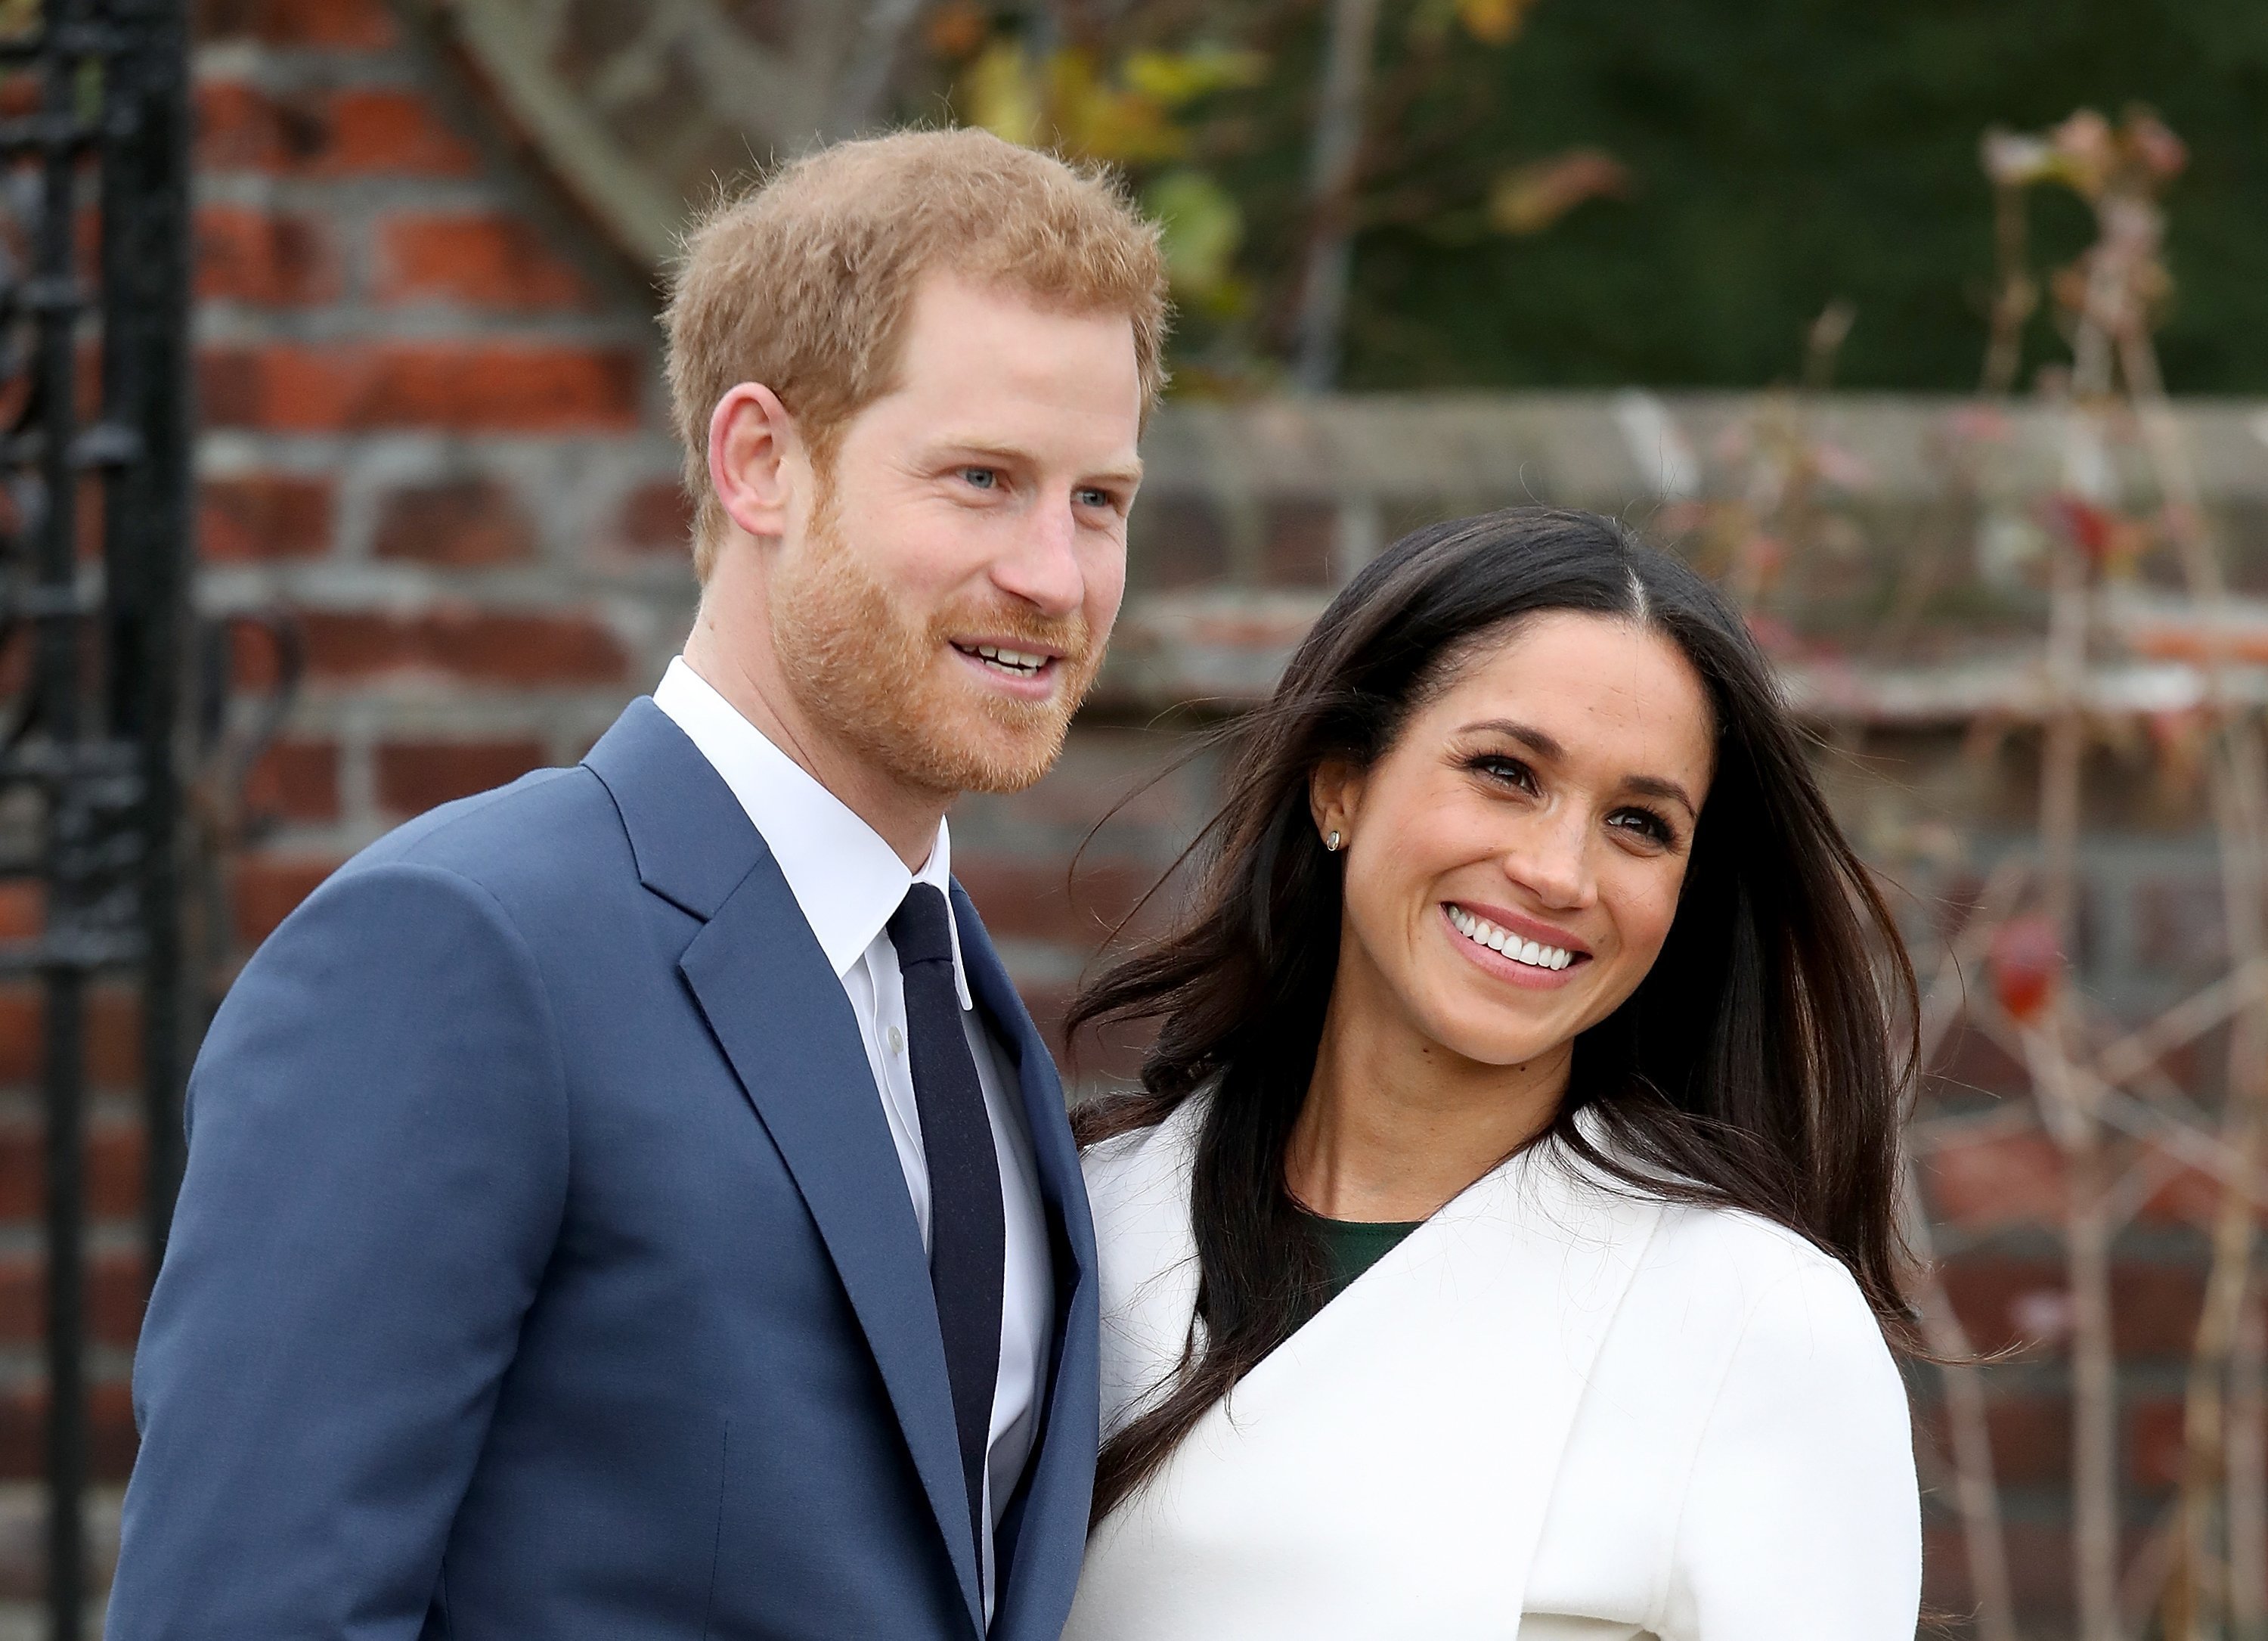 Prince Harry and actress Meghan Markle during an official photocall to announce their engagement at The Sunken Gardens at Kensington Palace on November 27, 2017|Photo: Getty Images